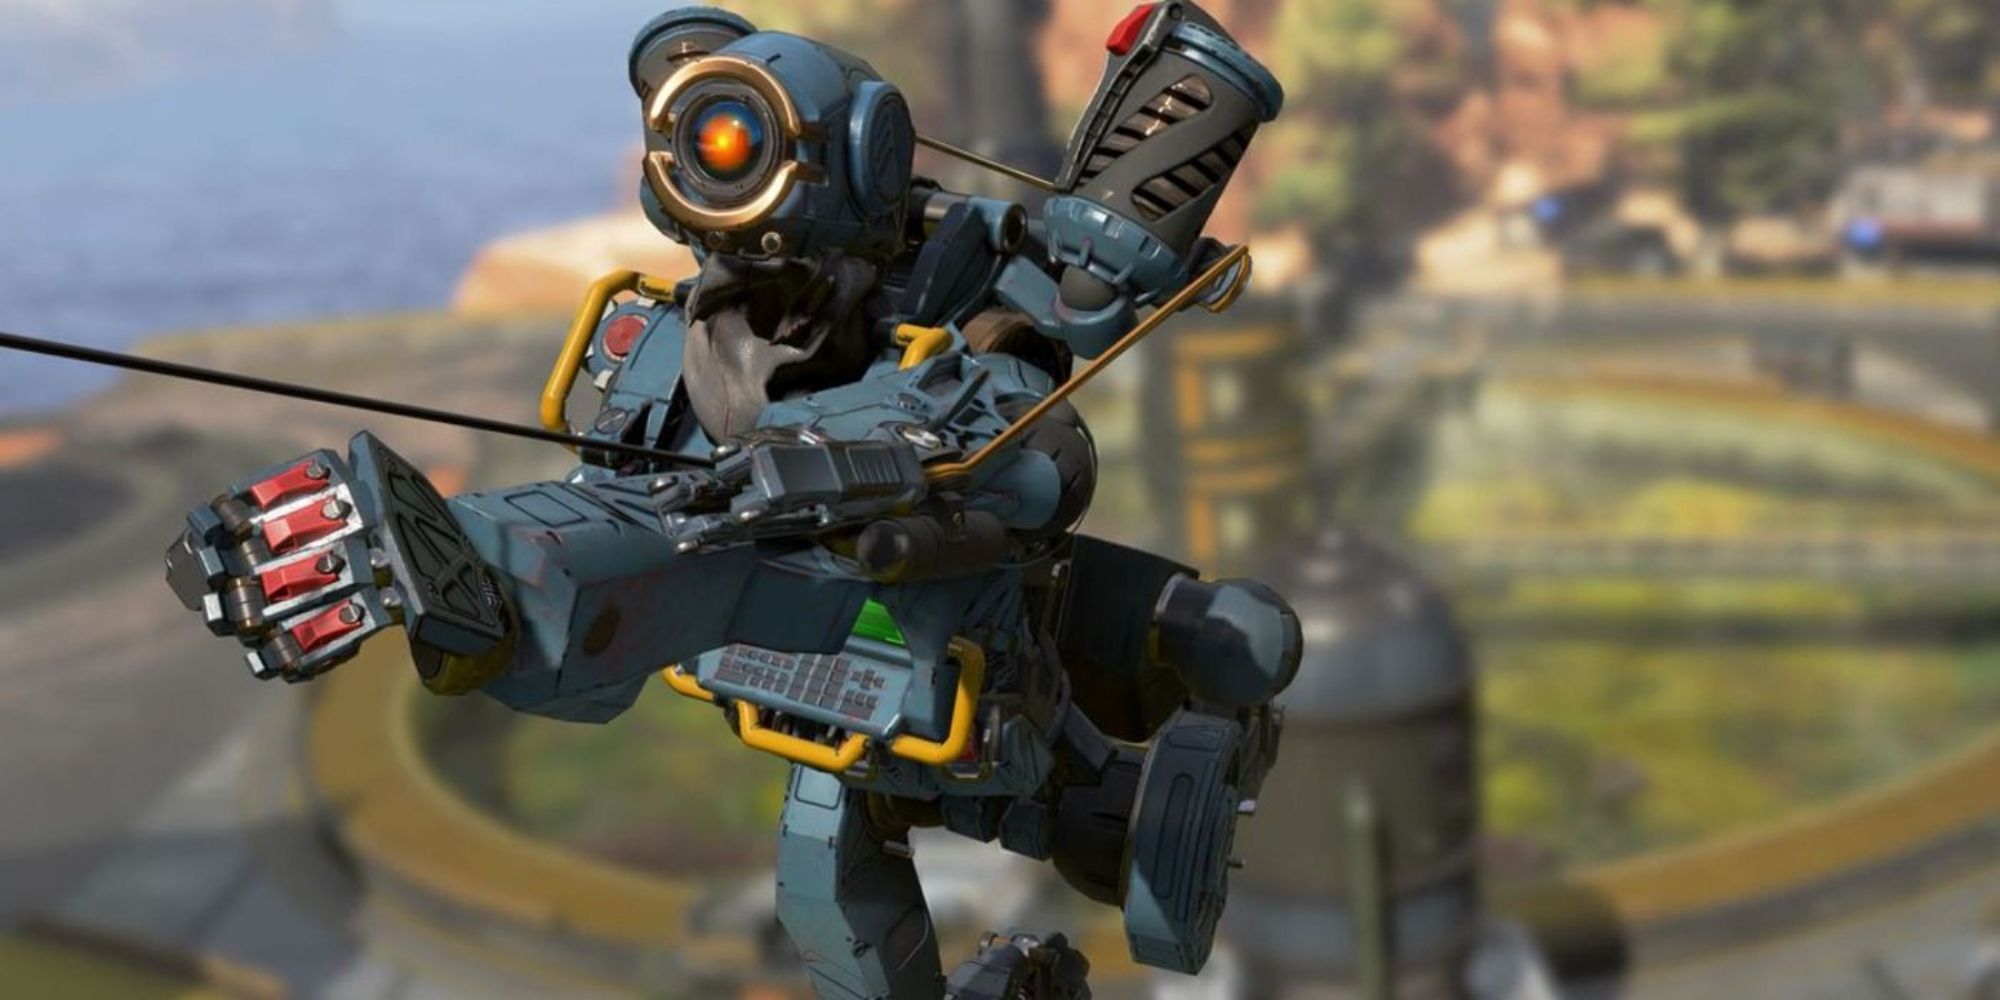 Pathfinder flying with a grapple in Apex Legends